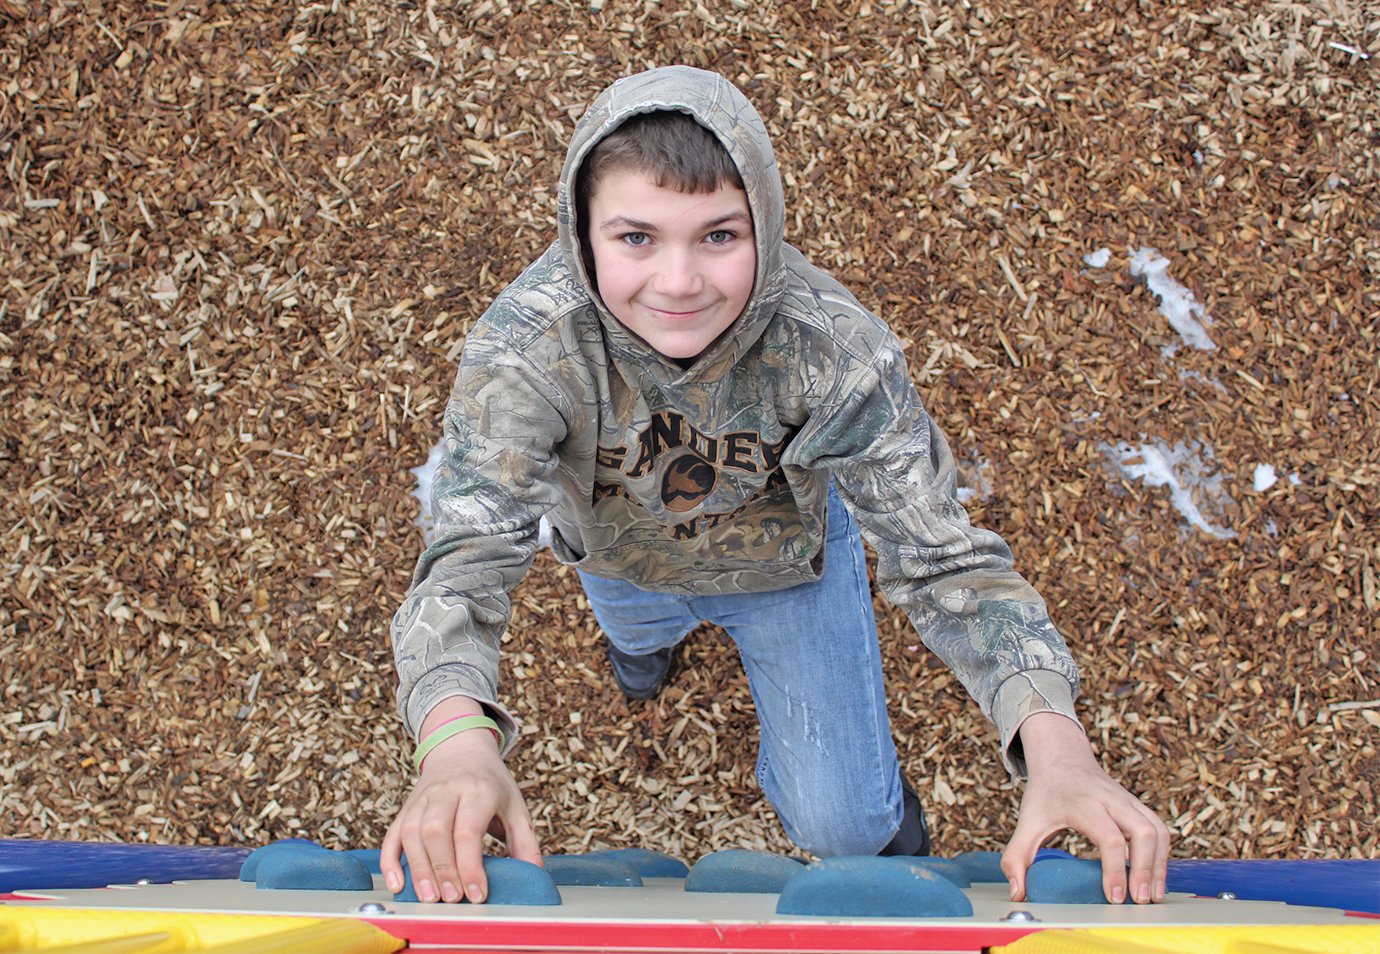 Parke Heritage Middle School student Conner Paxton, 13, enjoys the rock climbing wall at Milligan Park on Presidents Day alongside two siblings and a friend while his parents visit a Crawfordsville tire shop. Students around the country were out of school Monday, freeing them up for their favorite activities.